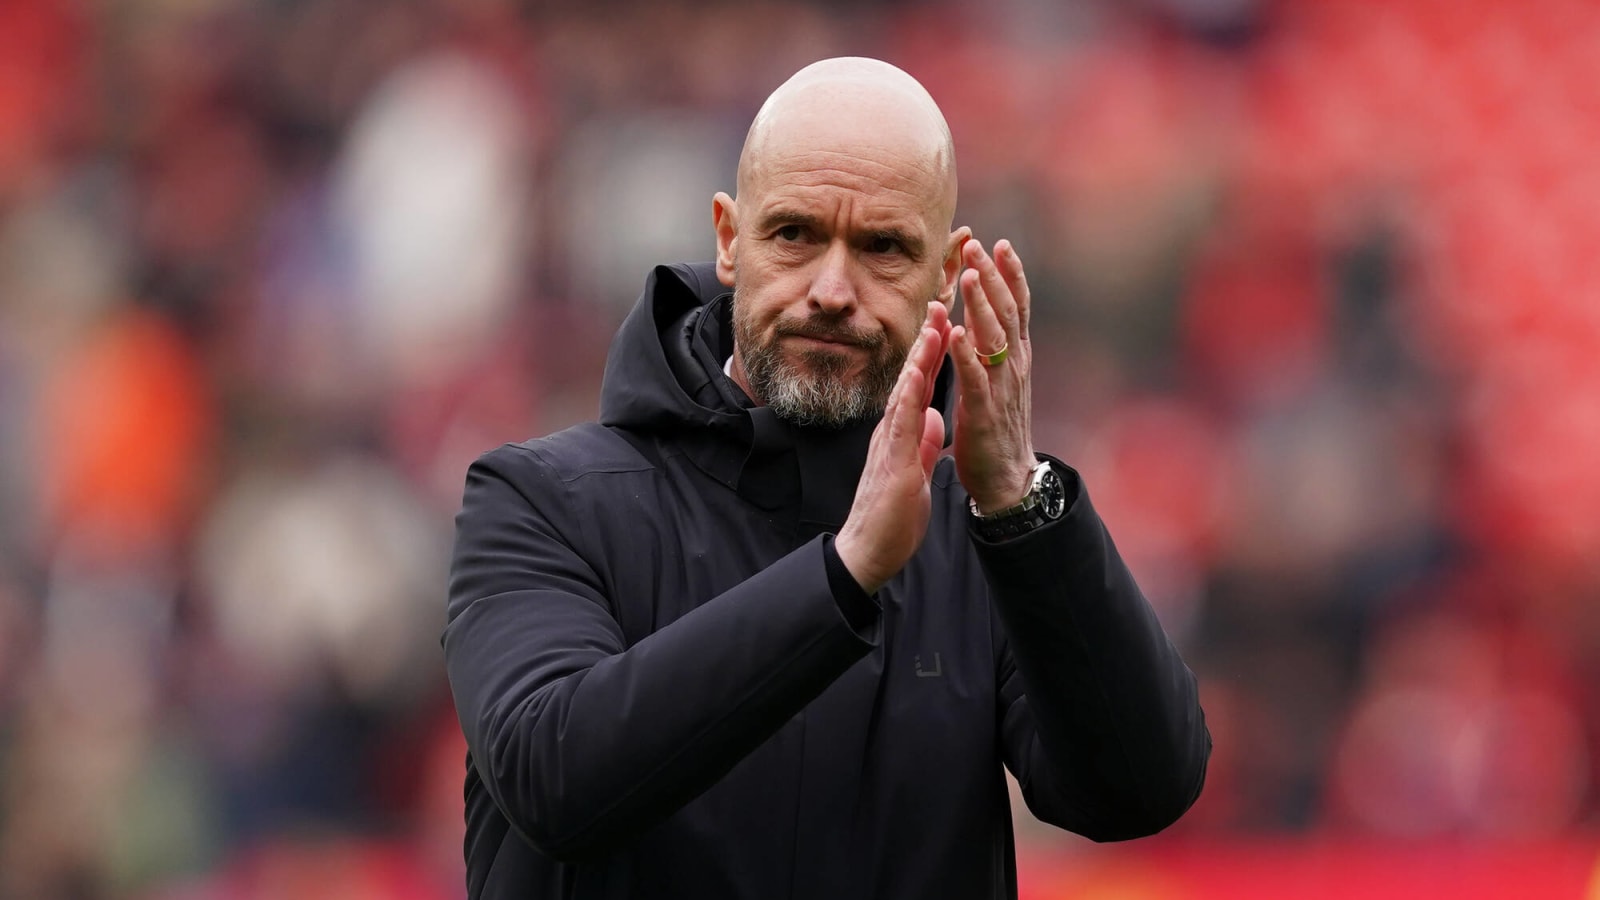 Ten Hag wishes he had an Arsenal player on his current team